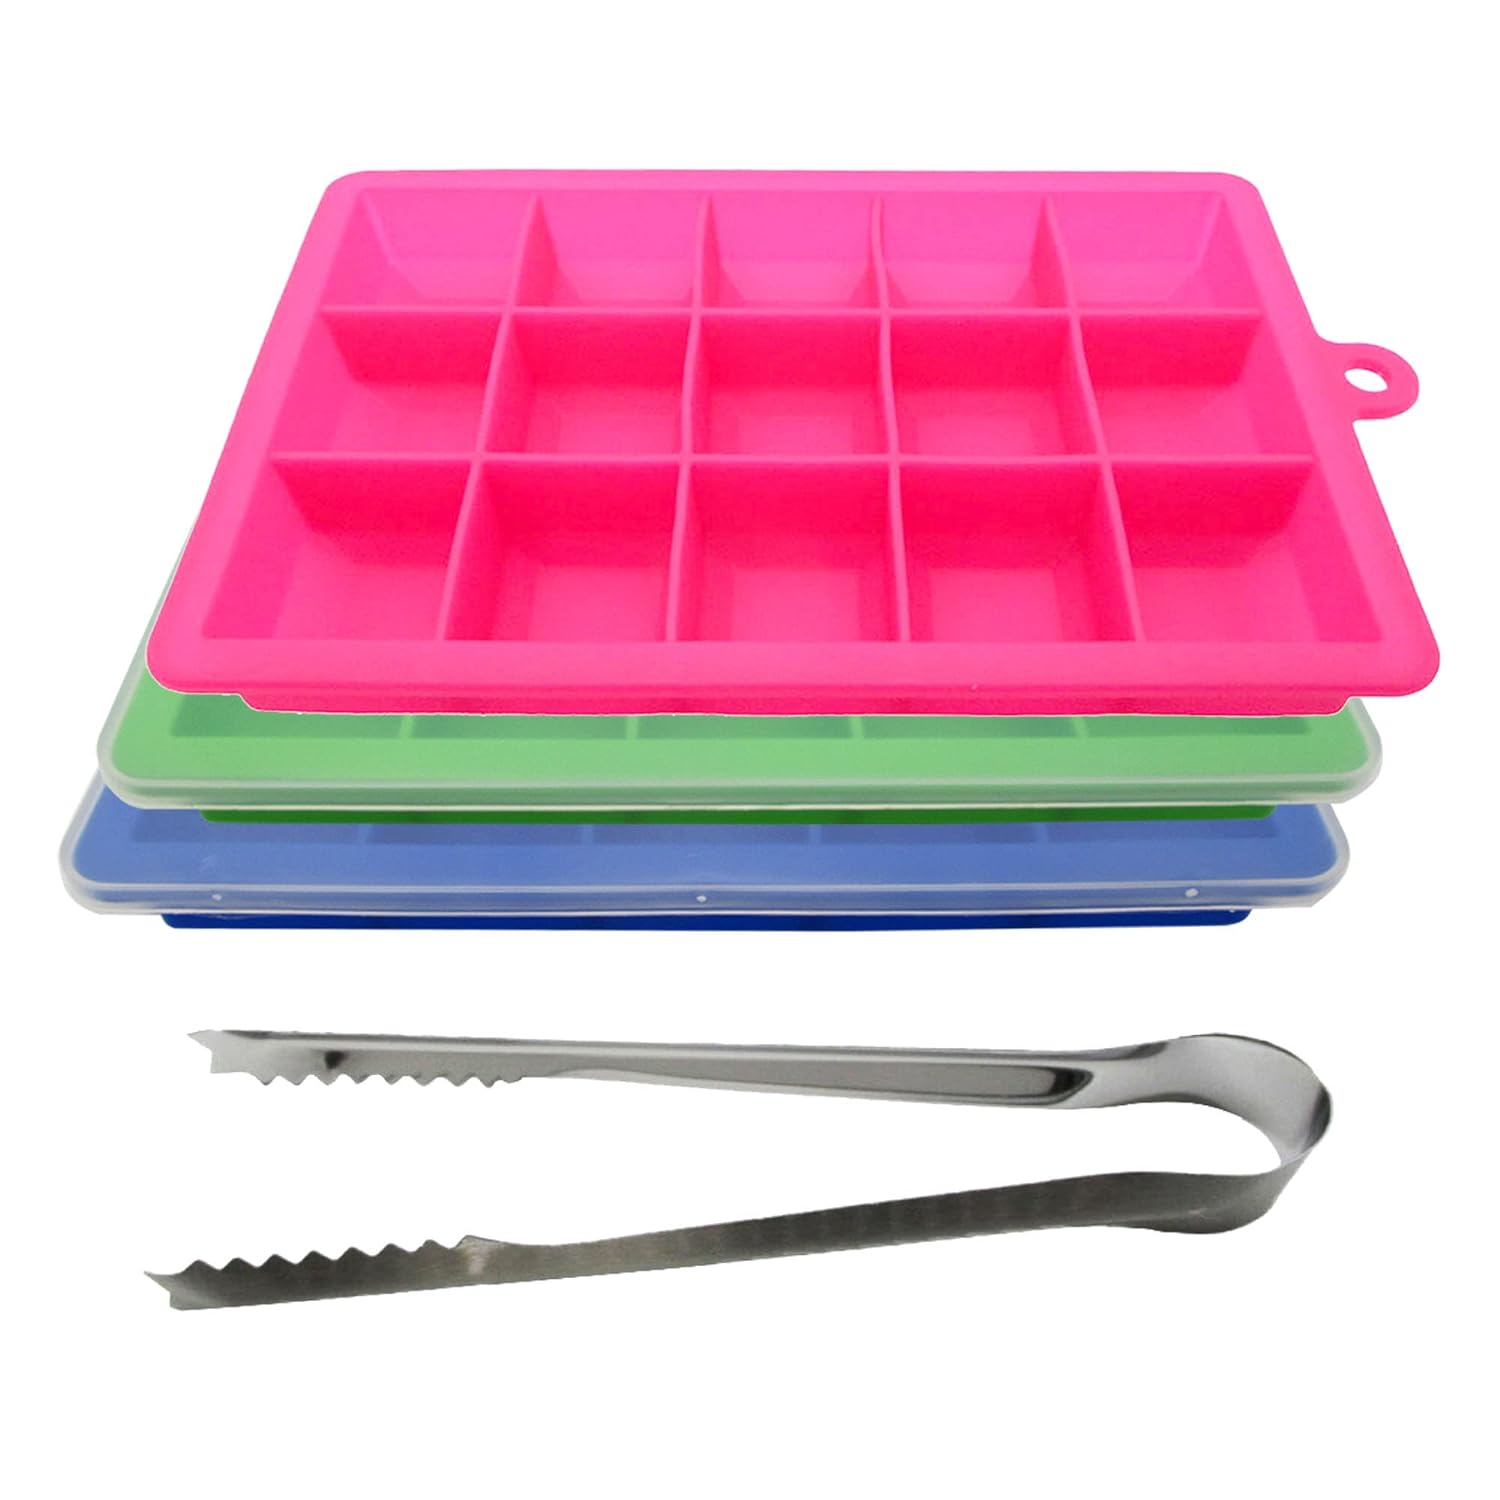 thinkstar 3 Pack Silicone Ice Cube Tray With Covers - Large Ice